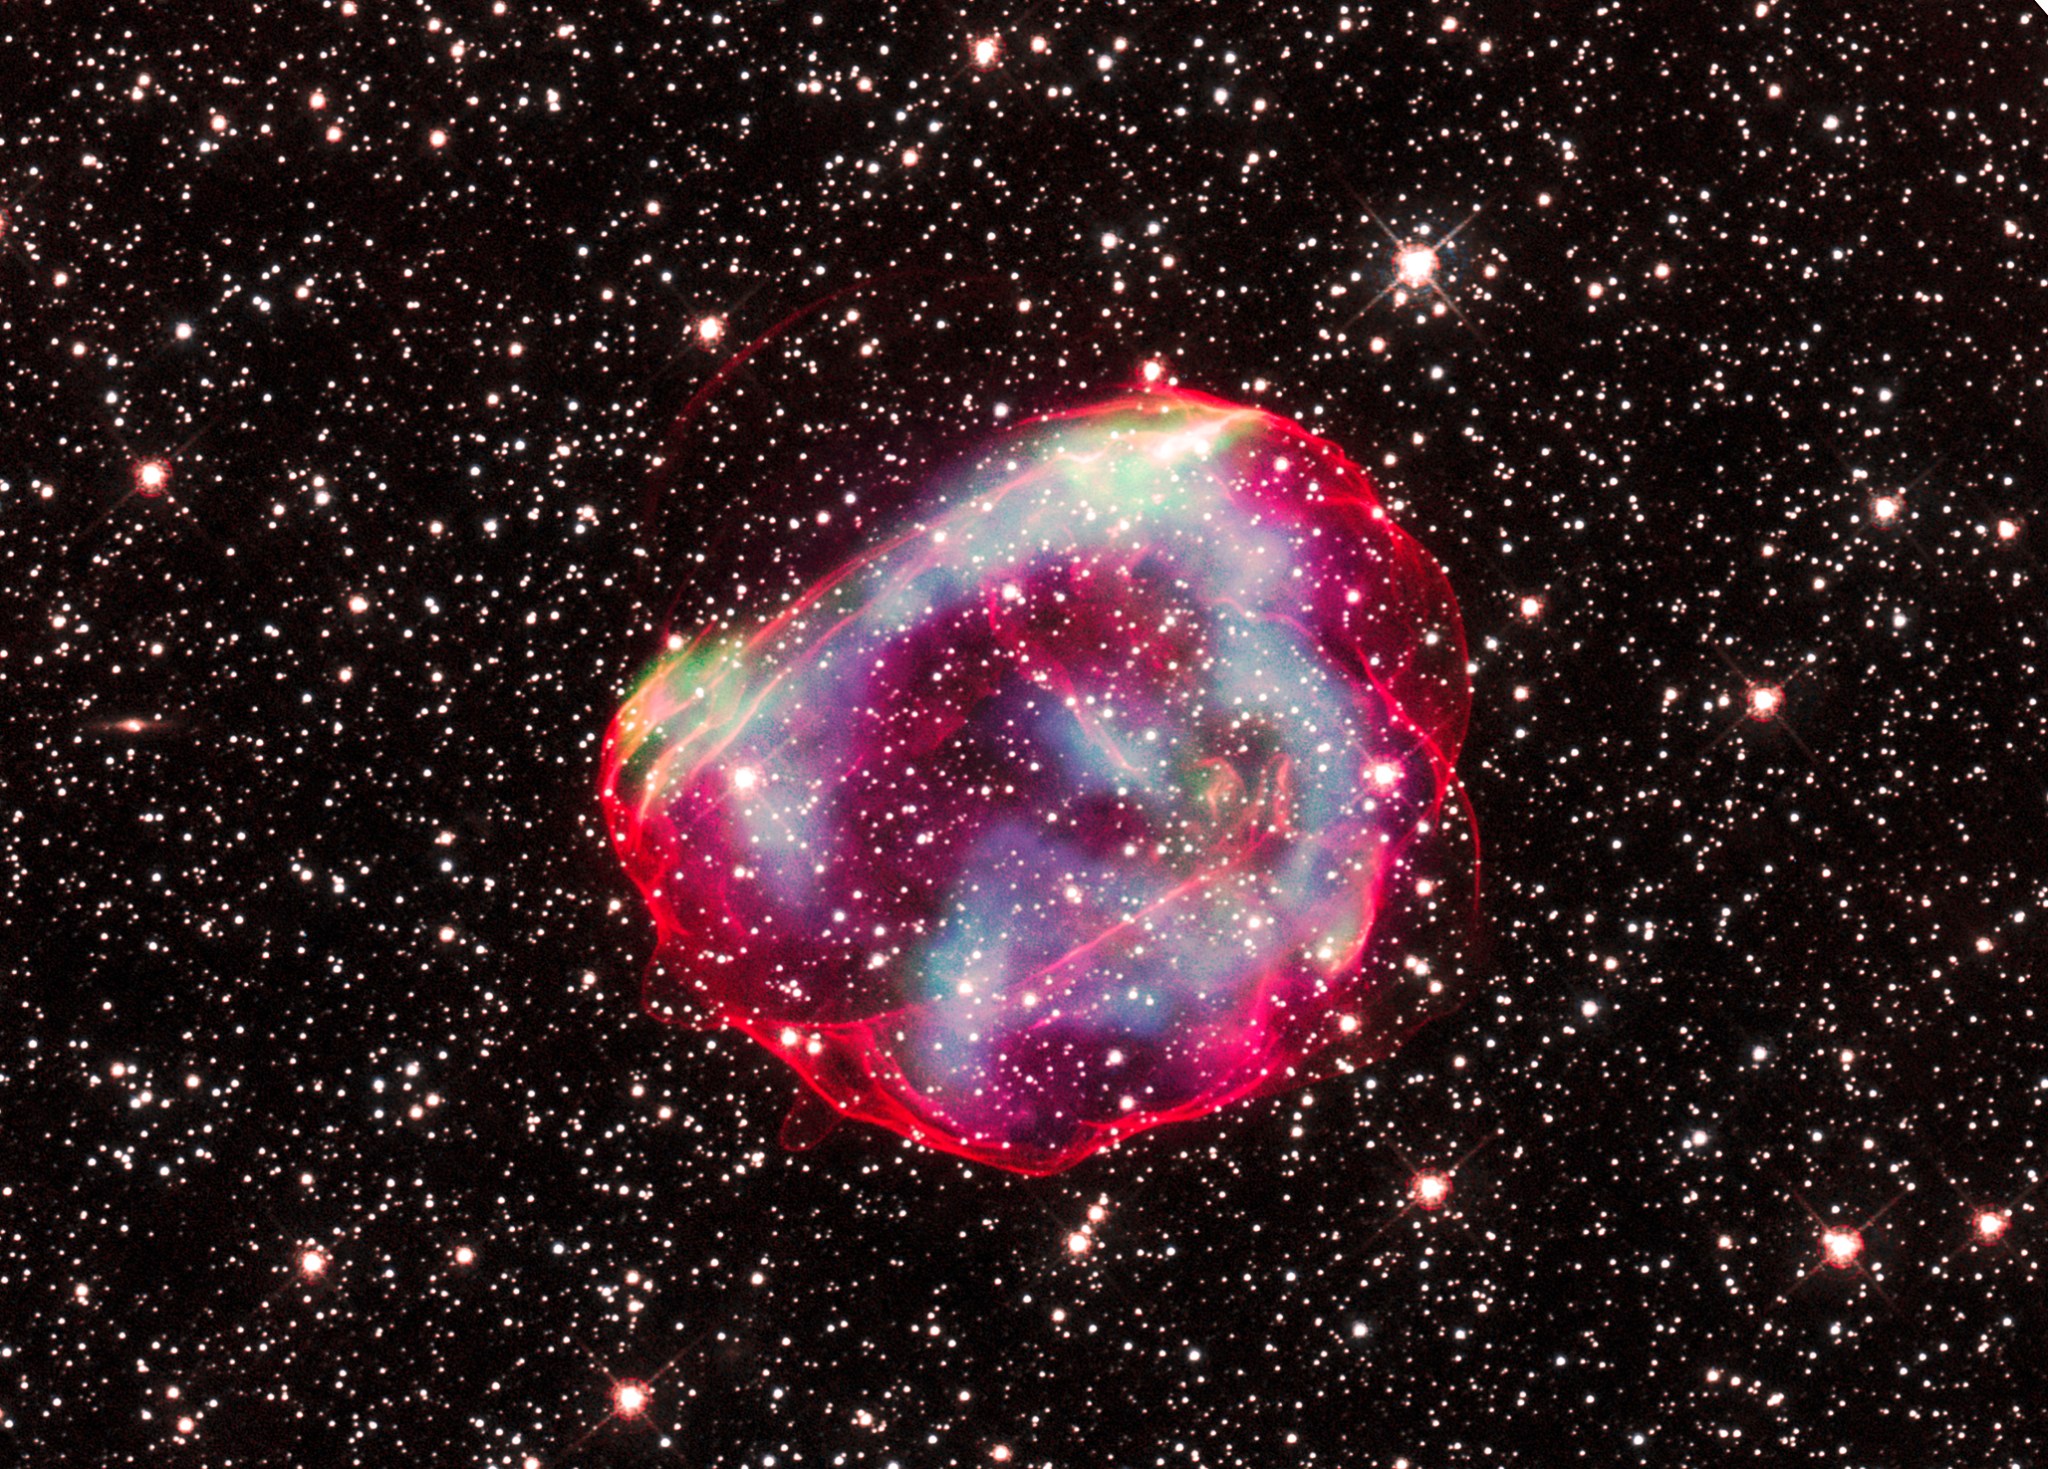 Composite X-ray & Optical Image of SNR 0519-69.0.